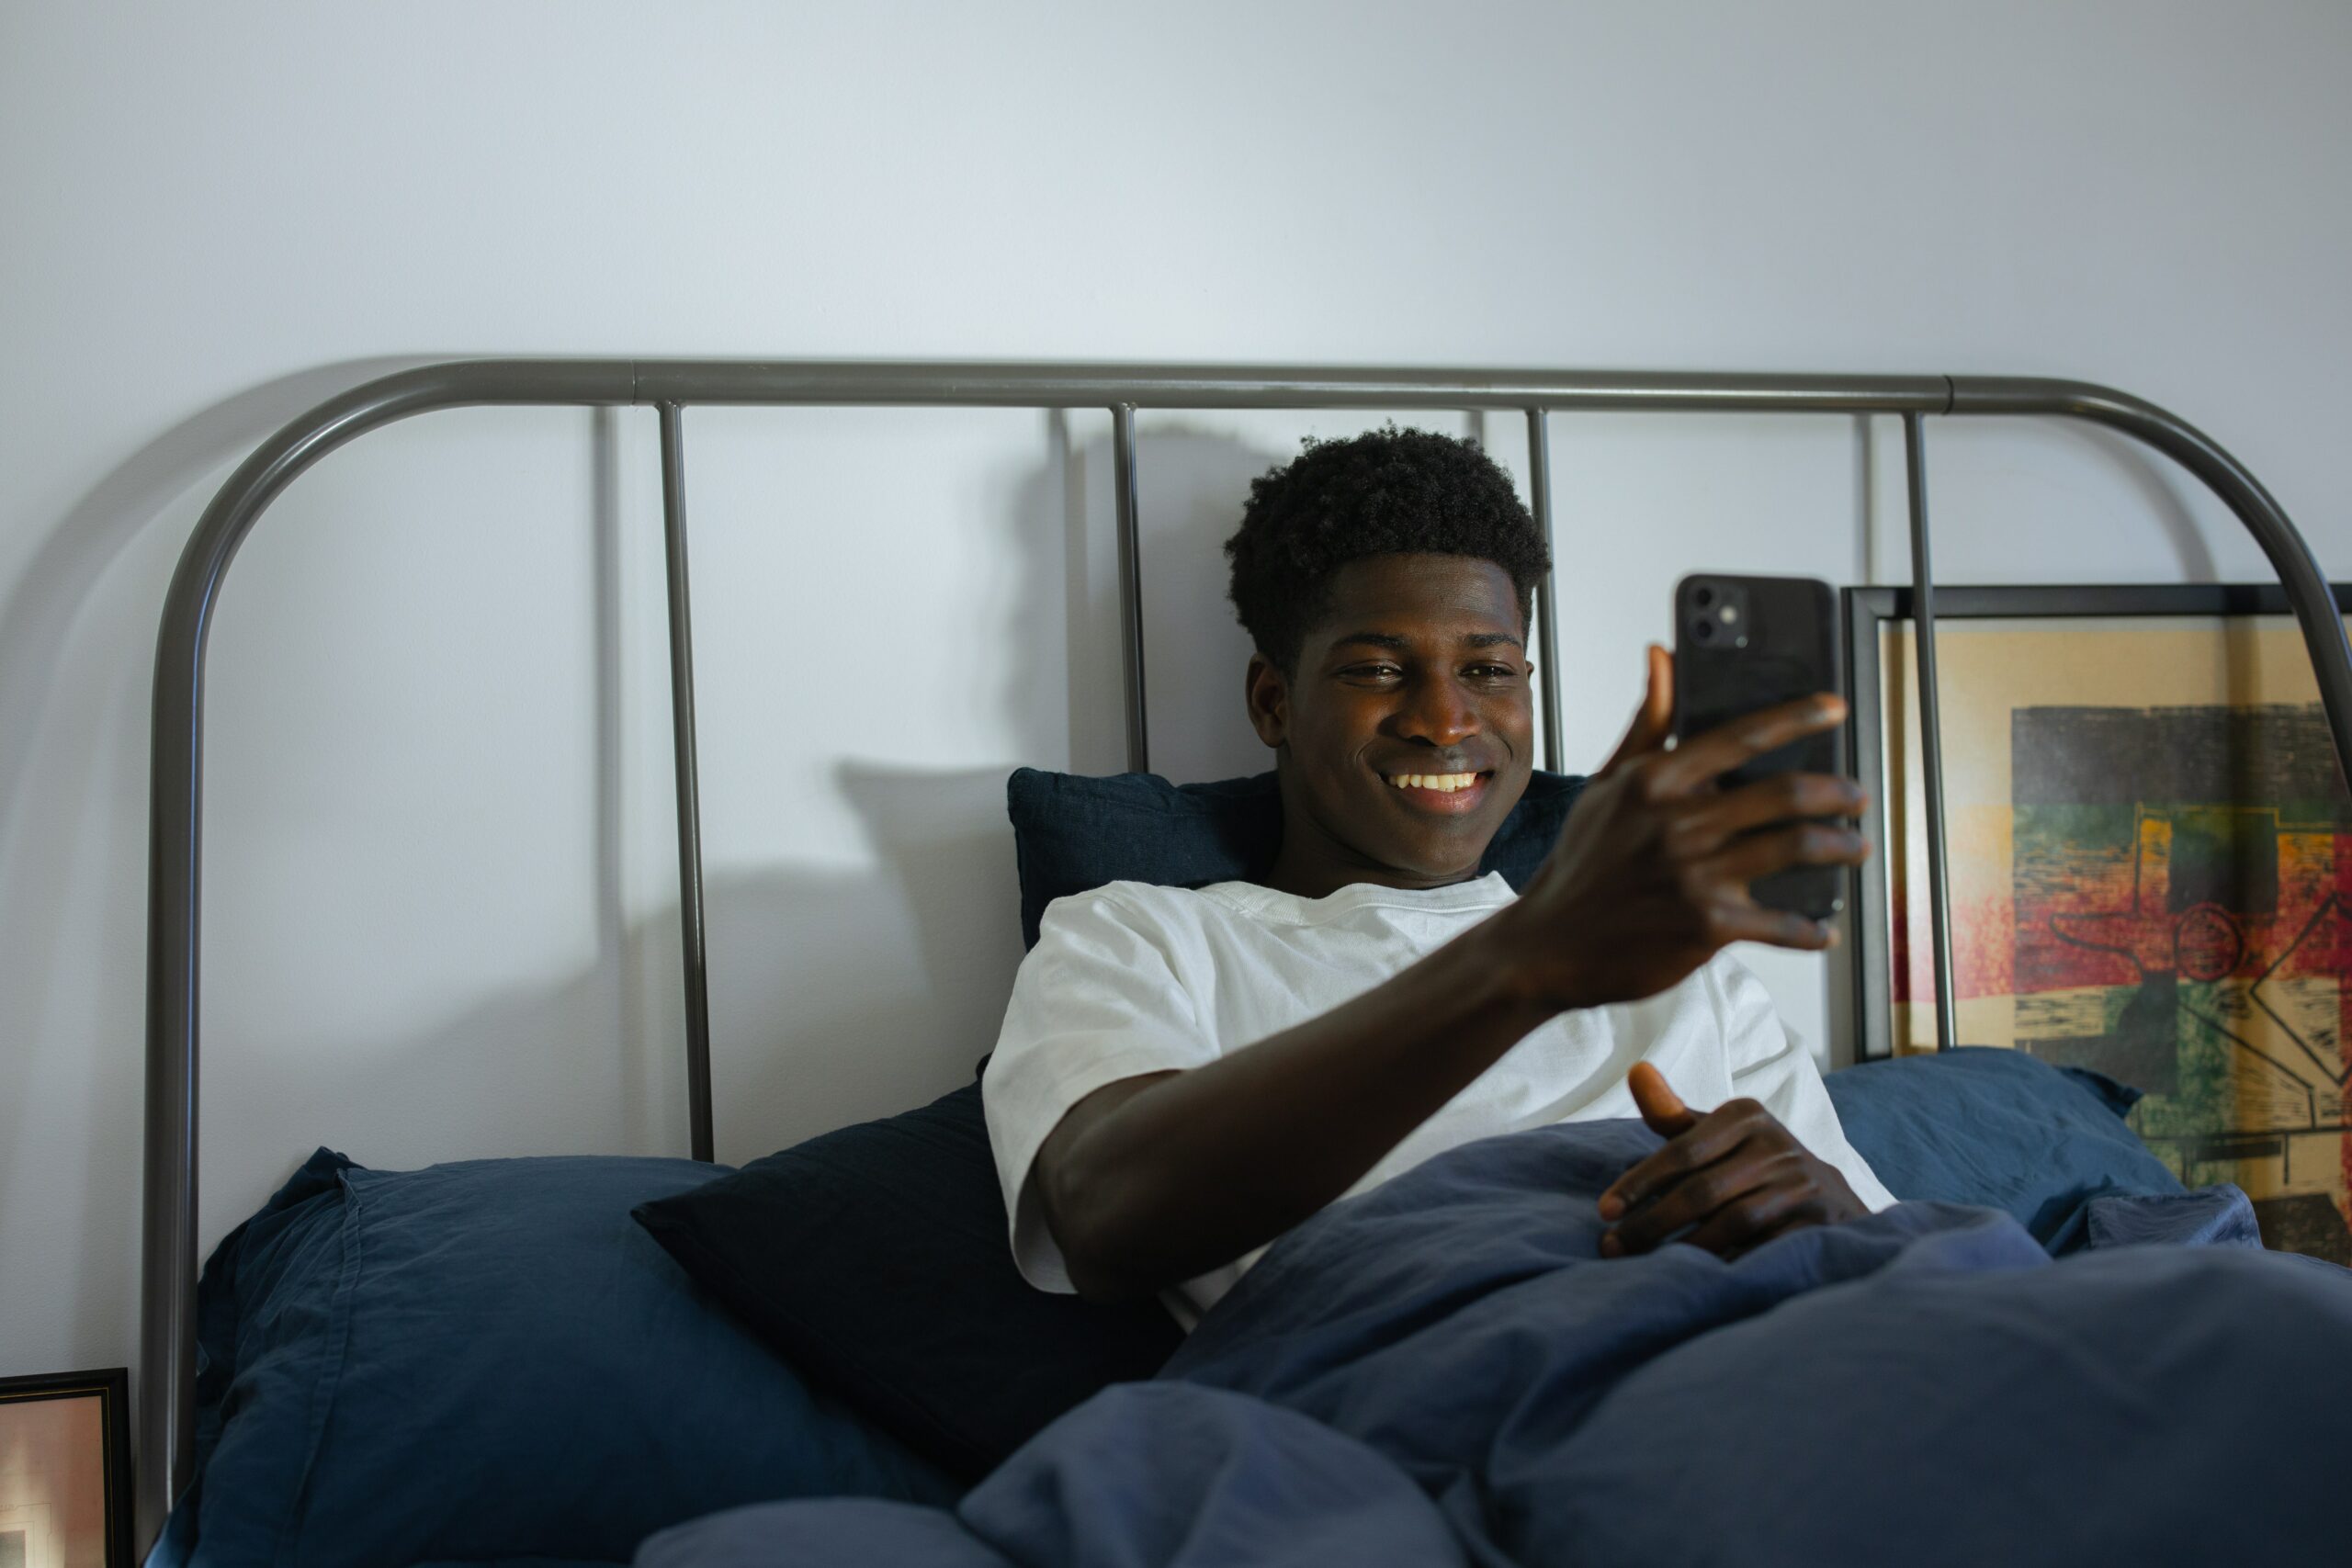 A guy is lying in bed, holding his phone like he’s on a video call, and smiling.